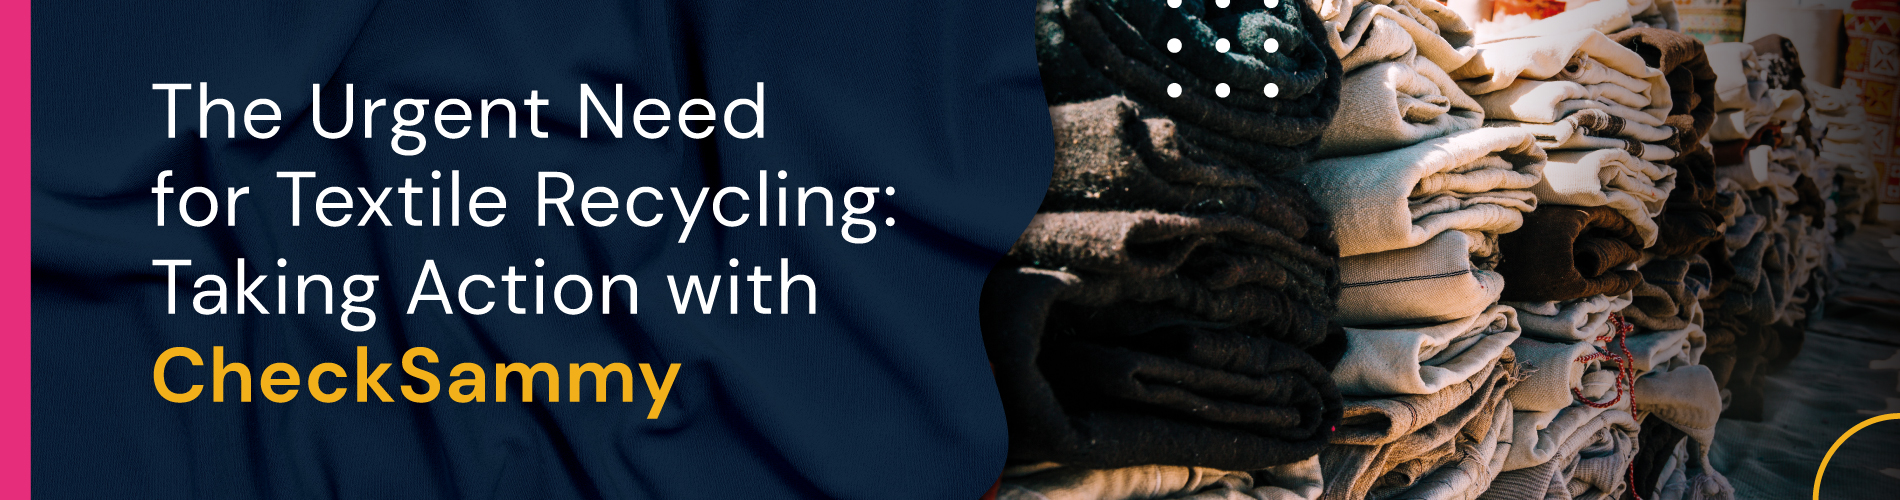 The Urgent Need for Textile Recycling: Taking Action with CheckSammy ...